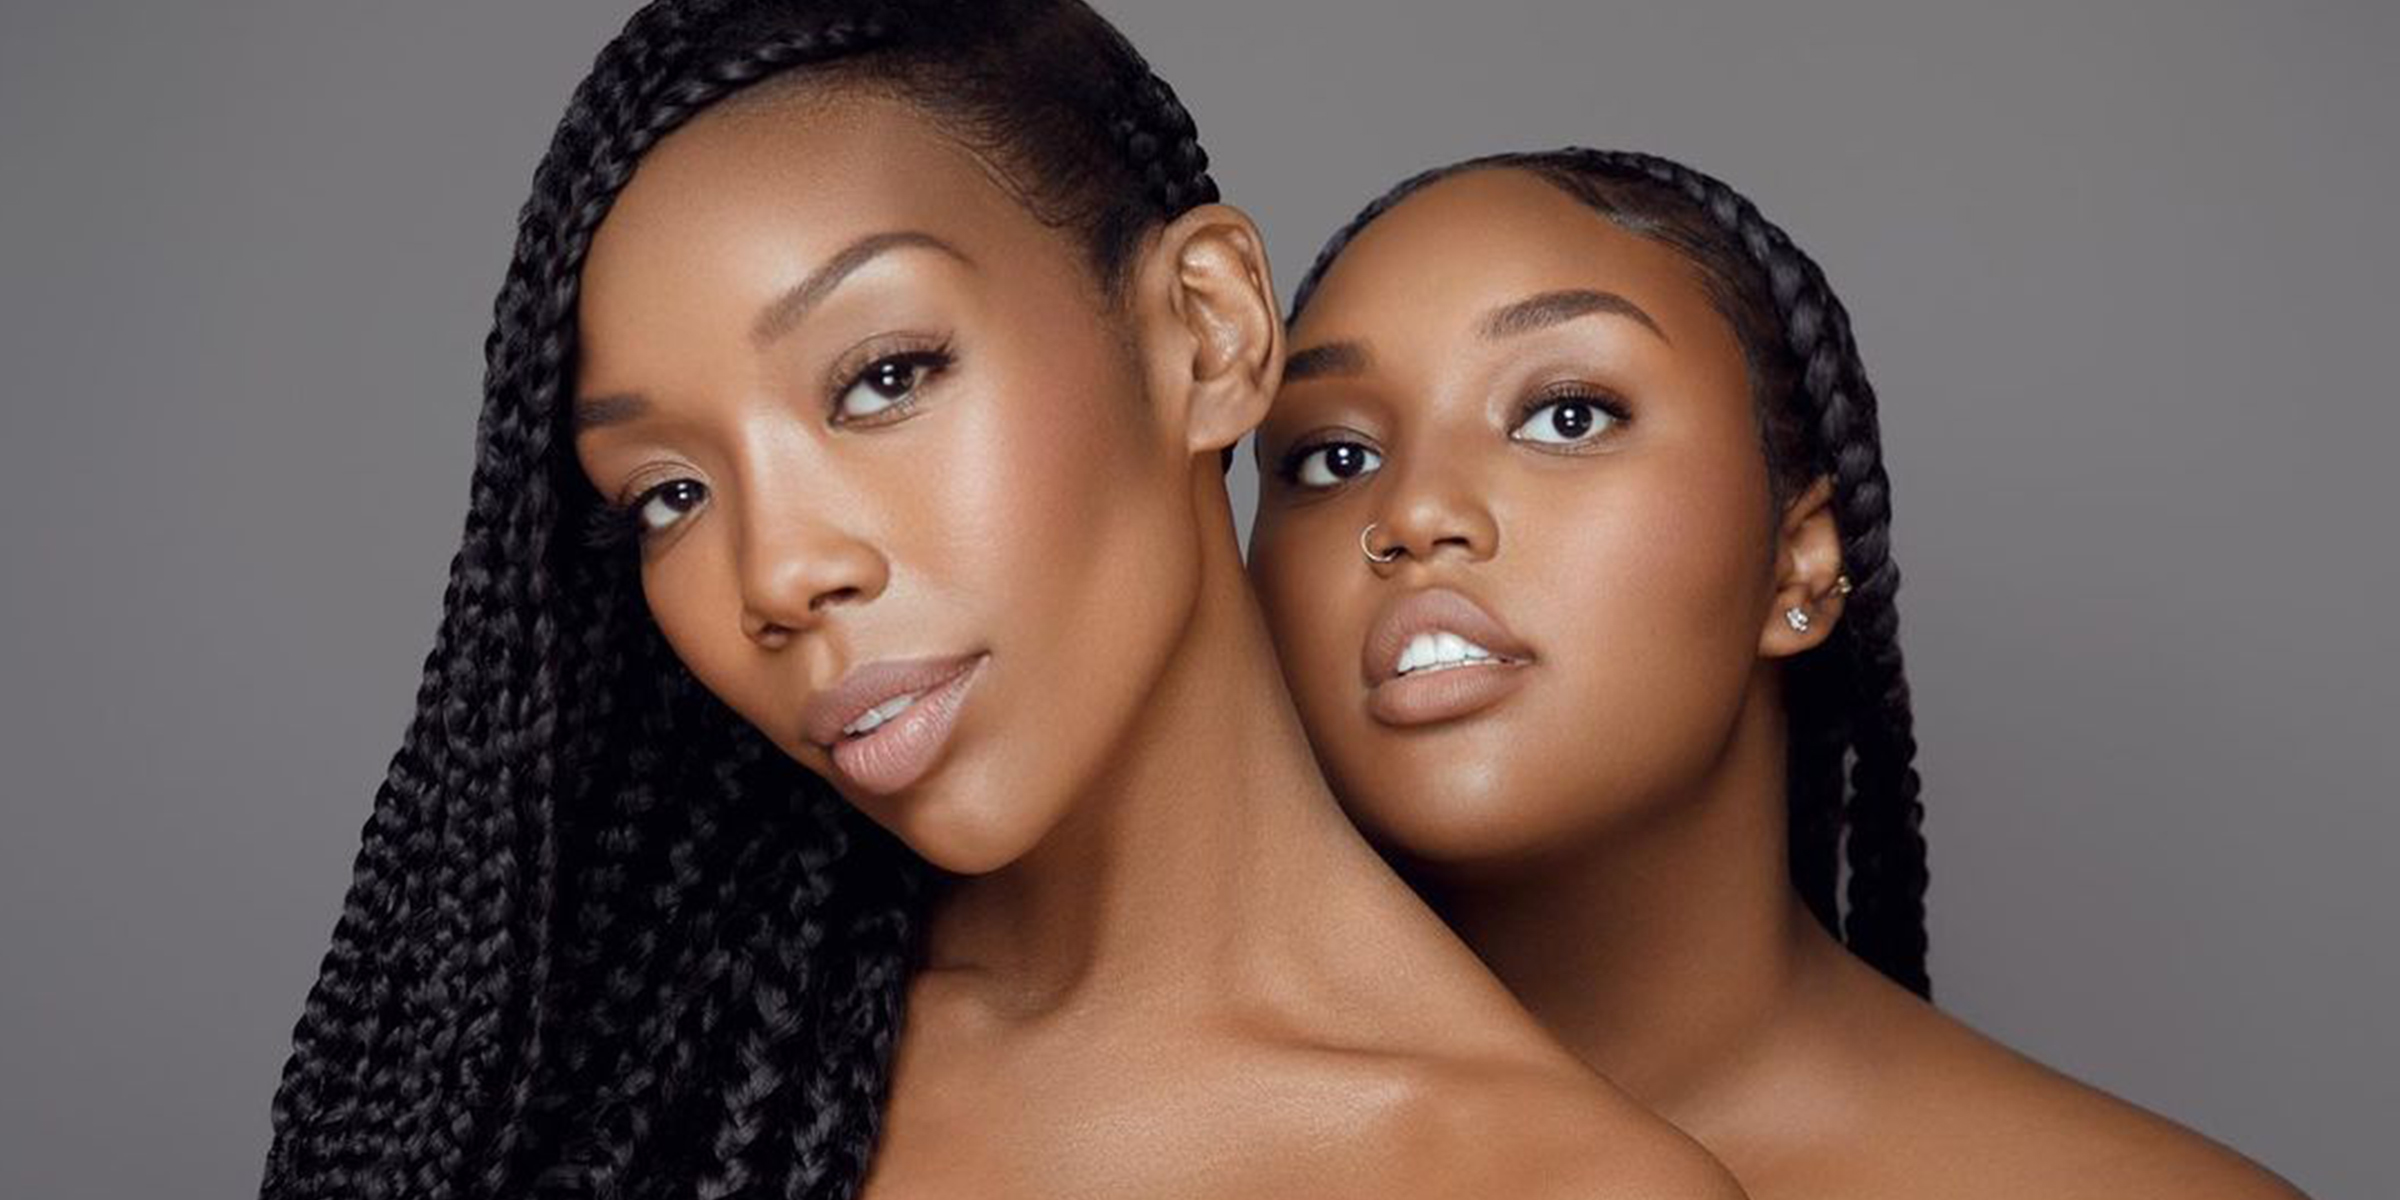 Brandy’s Daughter, Sy’rai, Sounds Just Like Her Mom On ‘Almost Doesn’t Count’ Cover